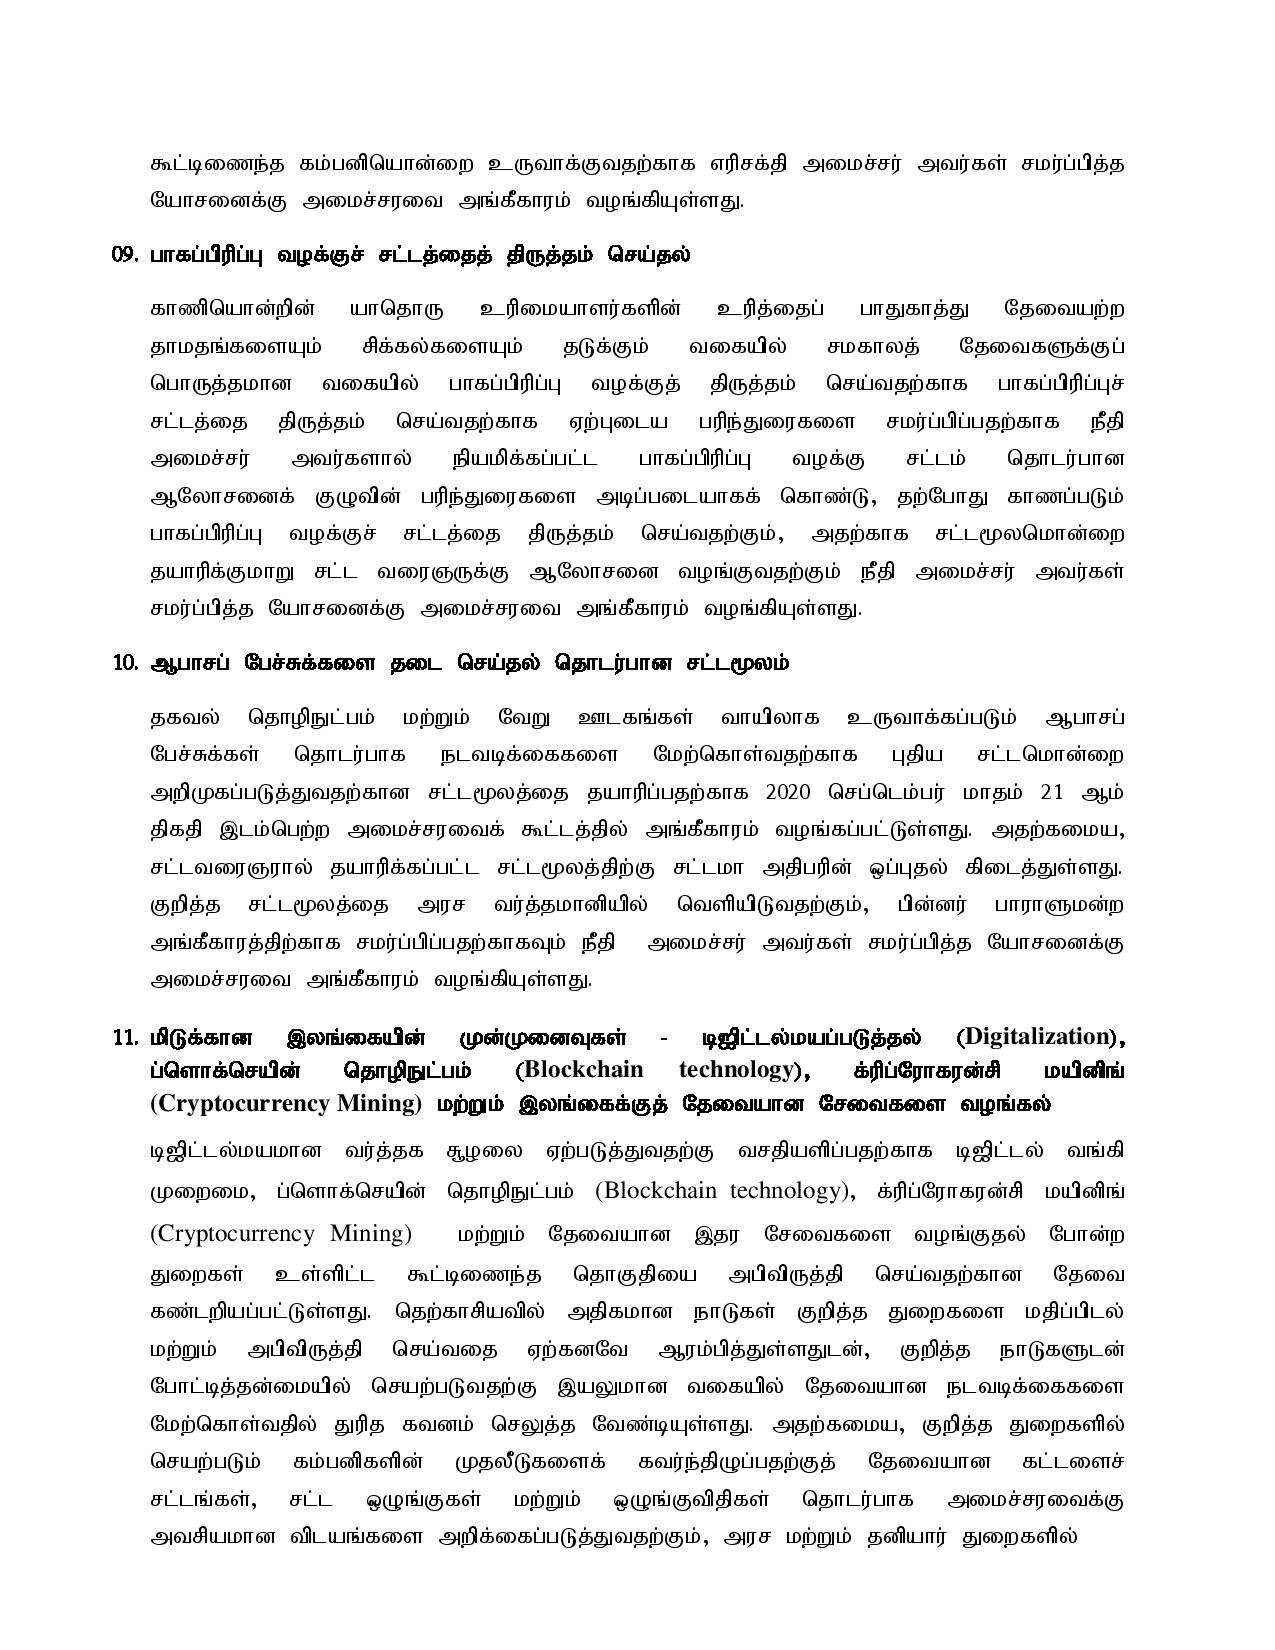 Cabinet Decision on 05.10.2021 Tamil page 005